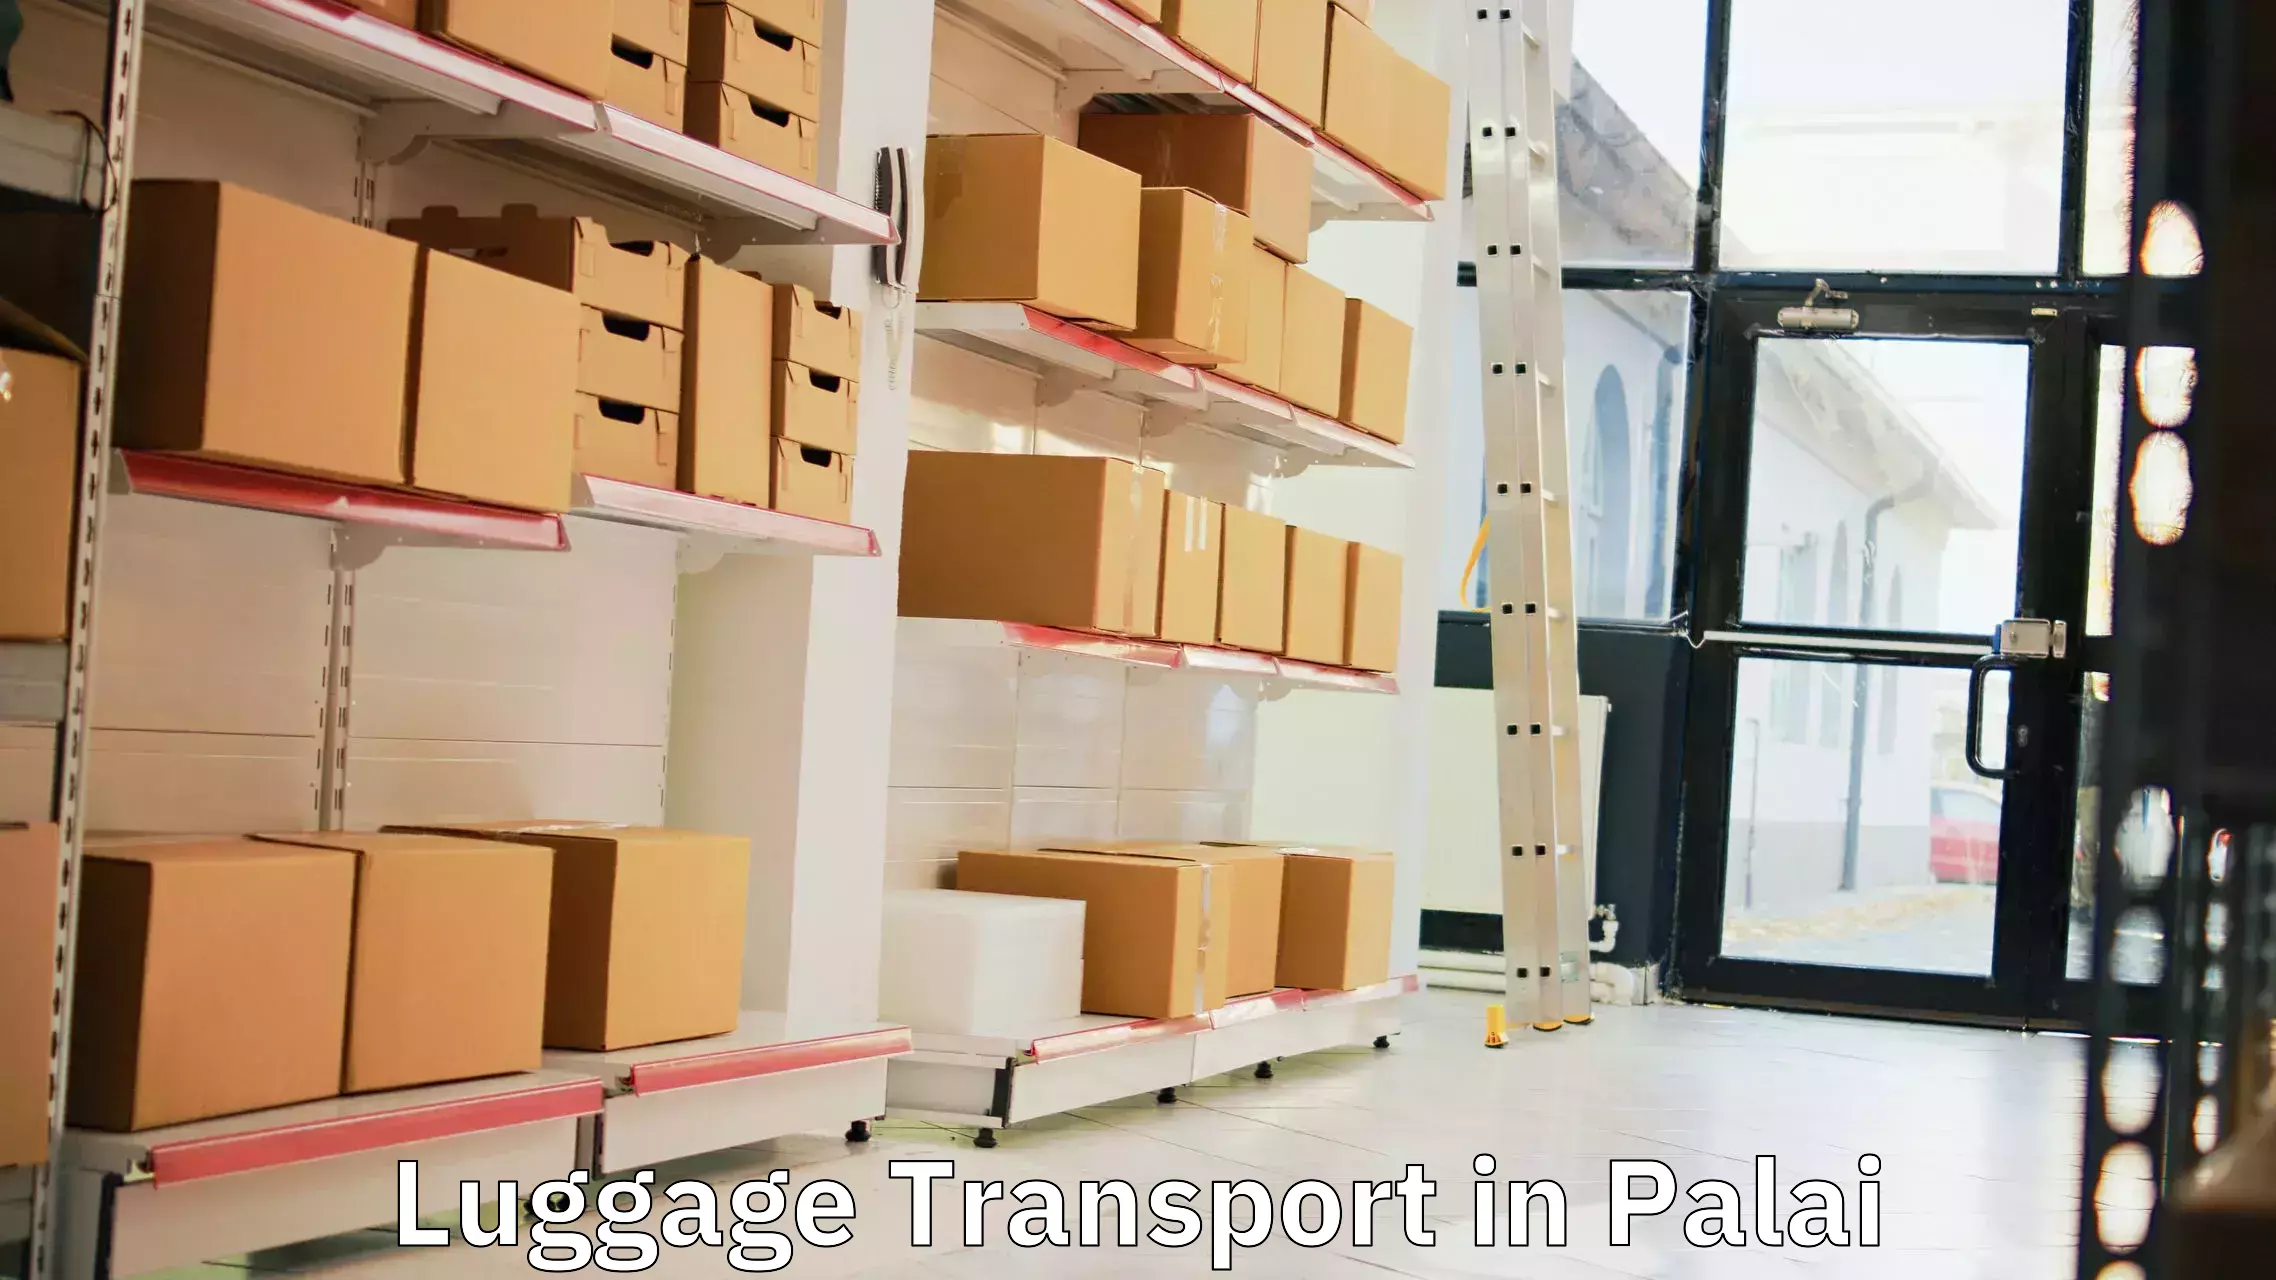 Business luggage transport in Palai